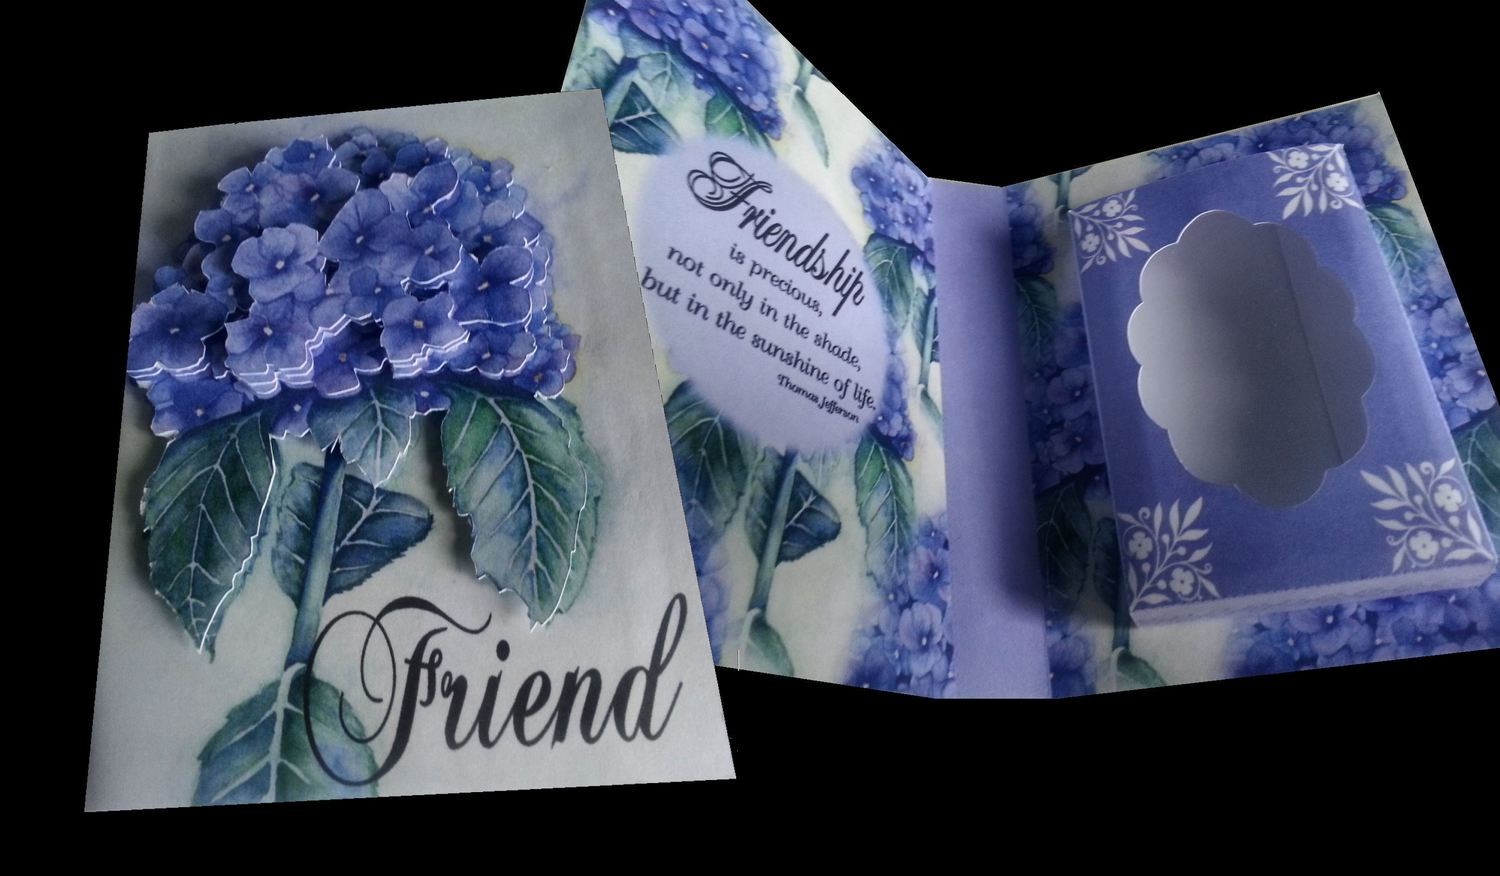 FRIEND Combi Card/Gift Box friendship is precious, not only in the shade but in the sunshine of life '